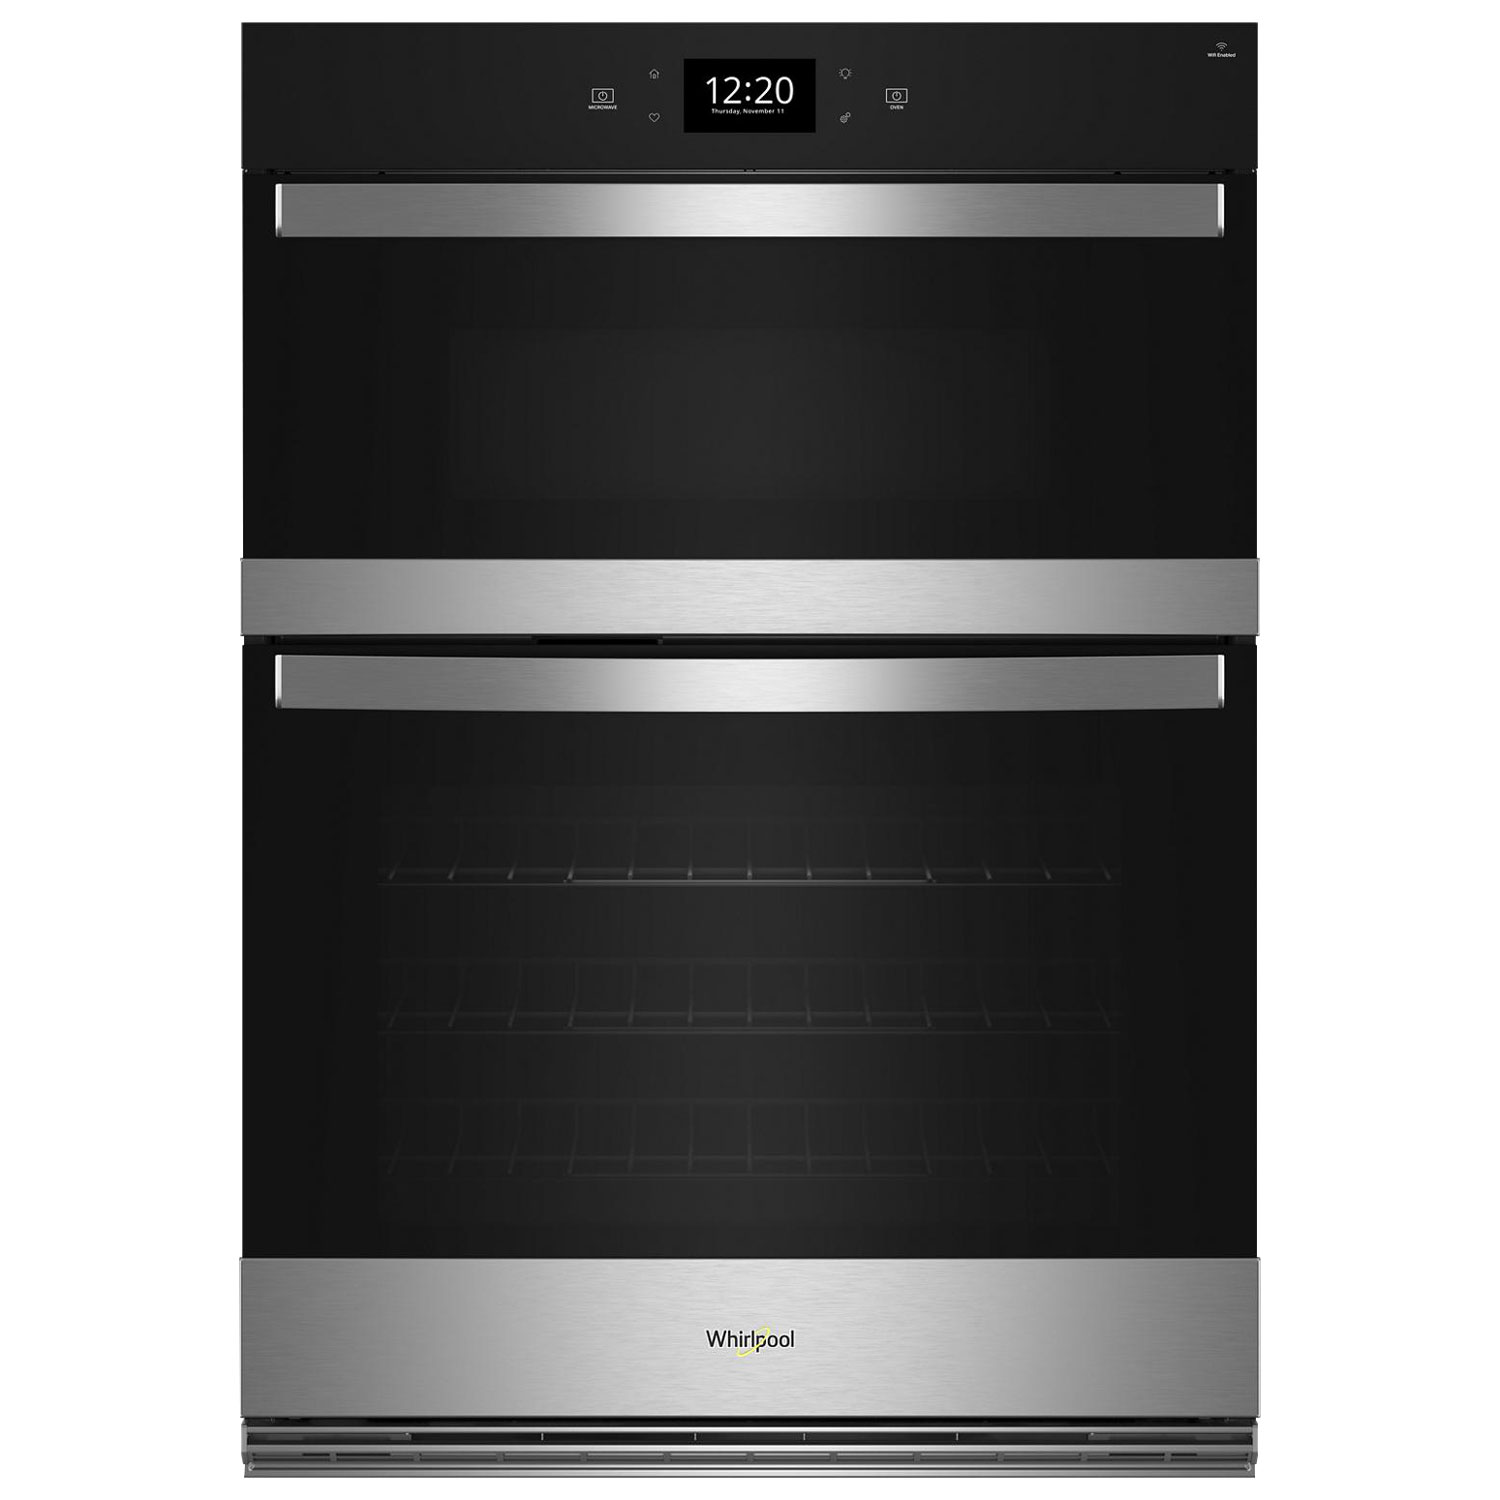 Whirlpool 30" 6.4 Cu. Ft. True Convection Electric Combination Wall Oven (WOEC7027PZ) - Stainless Steel